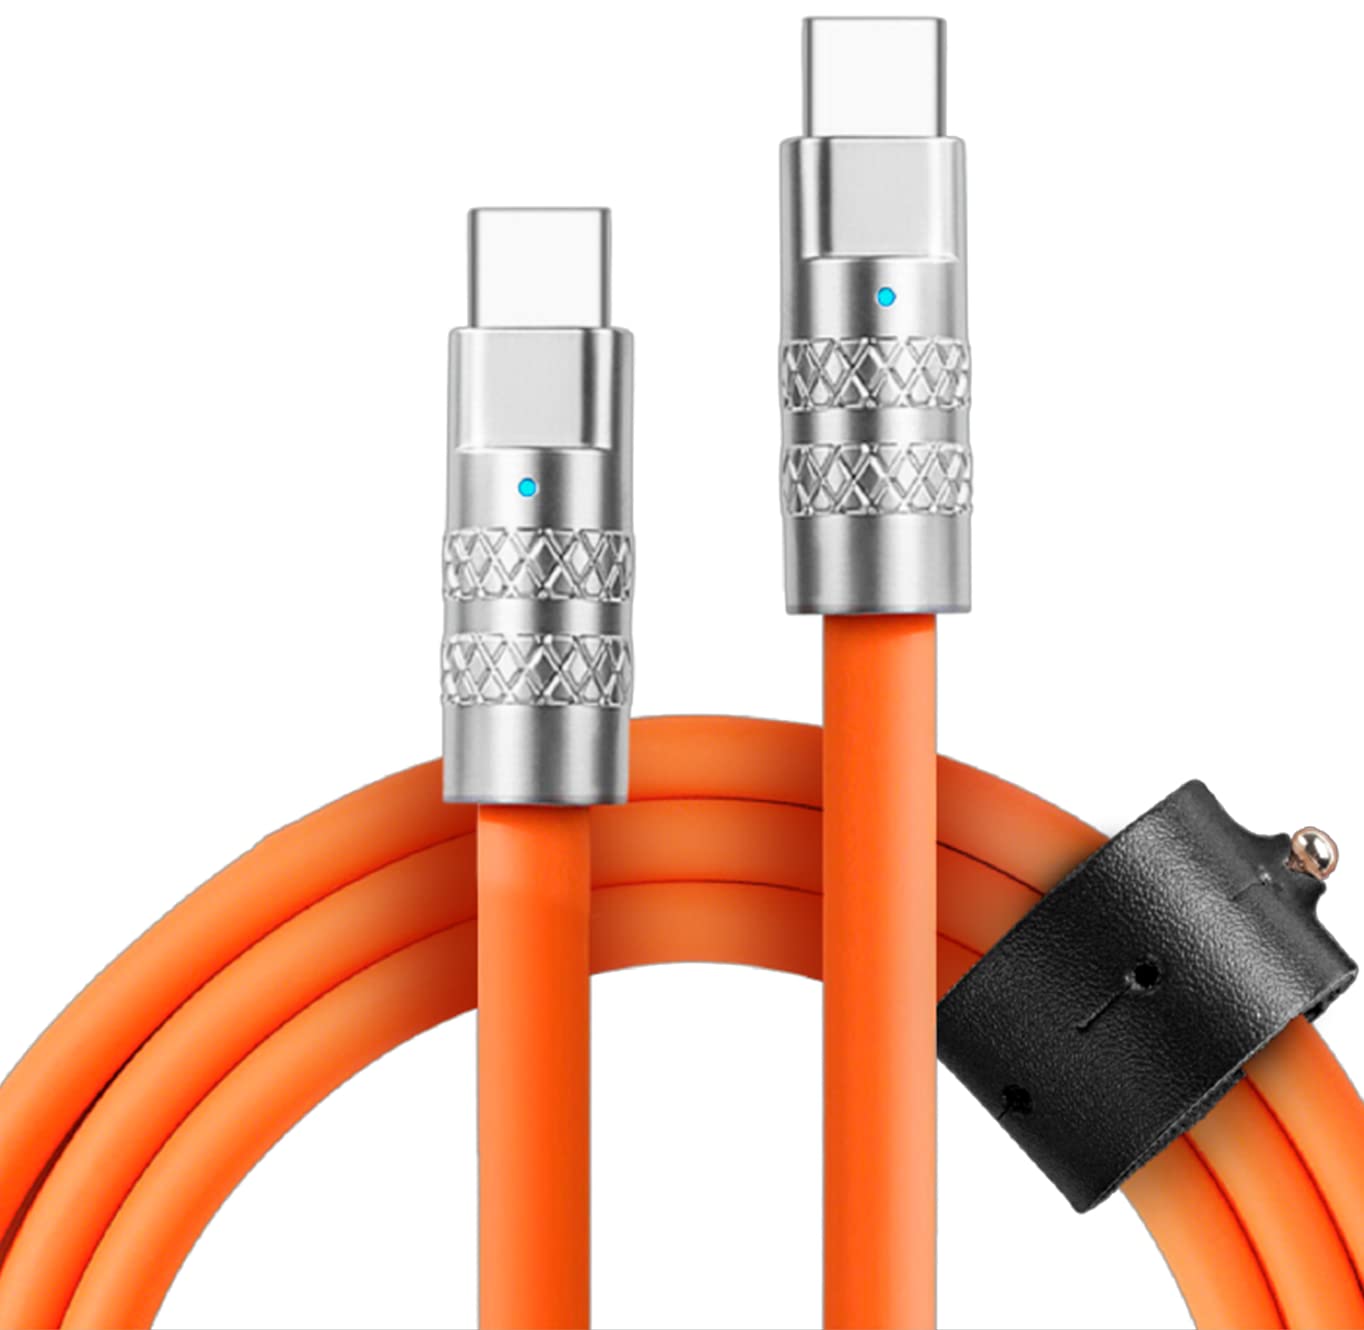 Statik TSumoCharge Fast Charging Cable 100W - Heavy Duty Unbreakable Silicone, Supports Data Transfer Type C to Type C Cable, Cord Wrap Organizer Included, USB C to USBC 6FT/2M, Orange